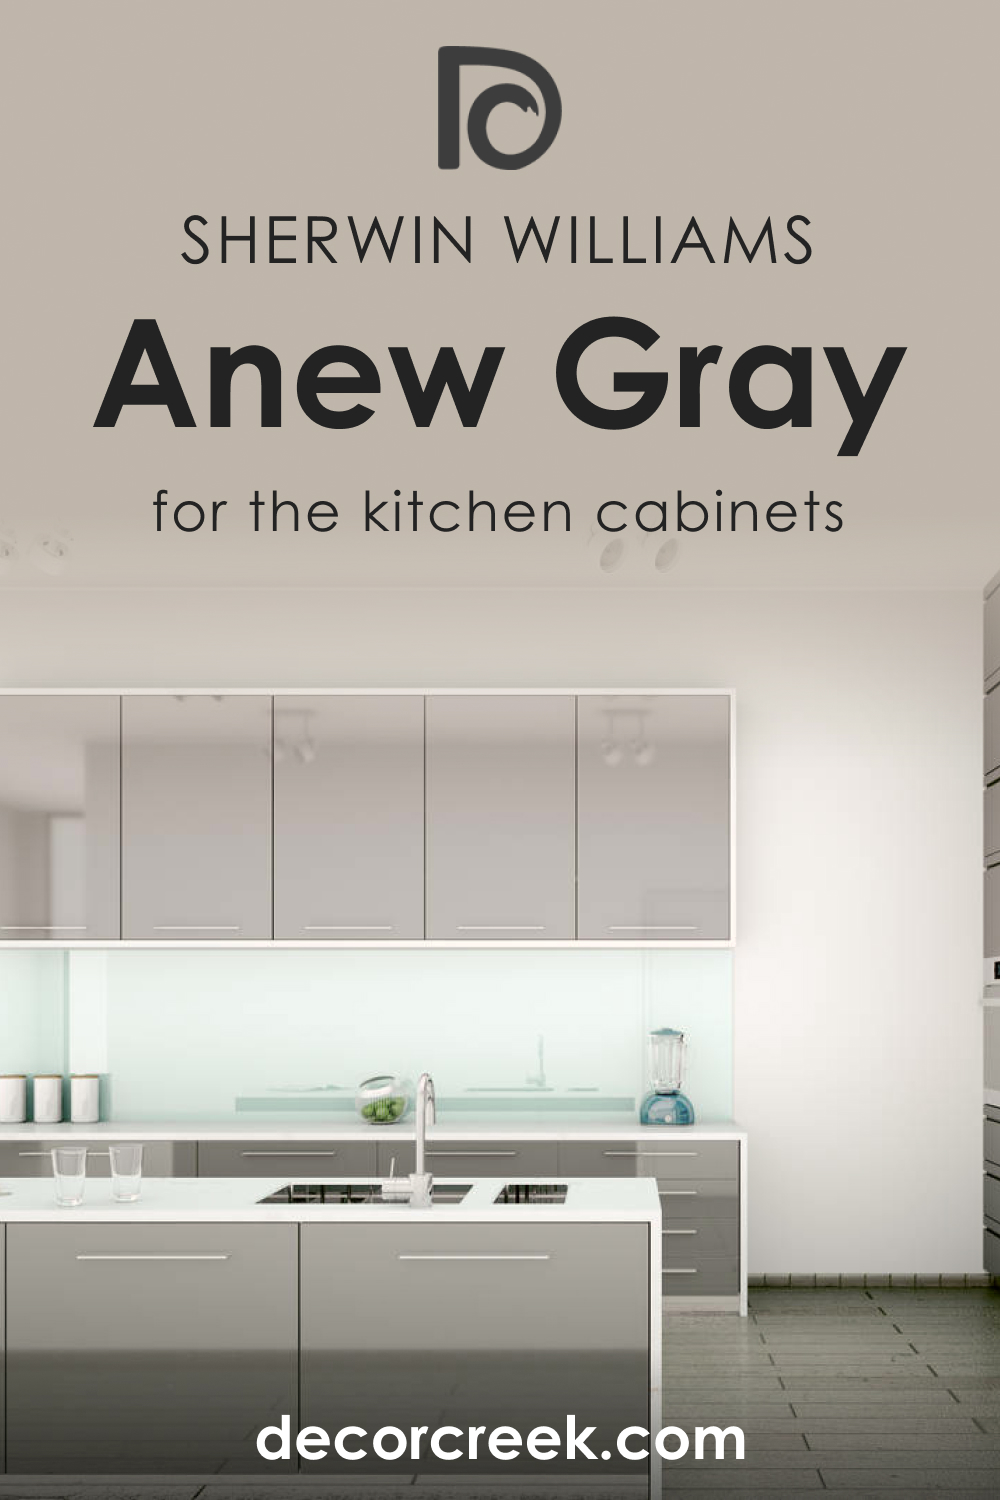 How to Use SW 7030 Anew Gray for the Kitchen Cabinets?